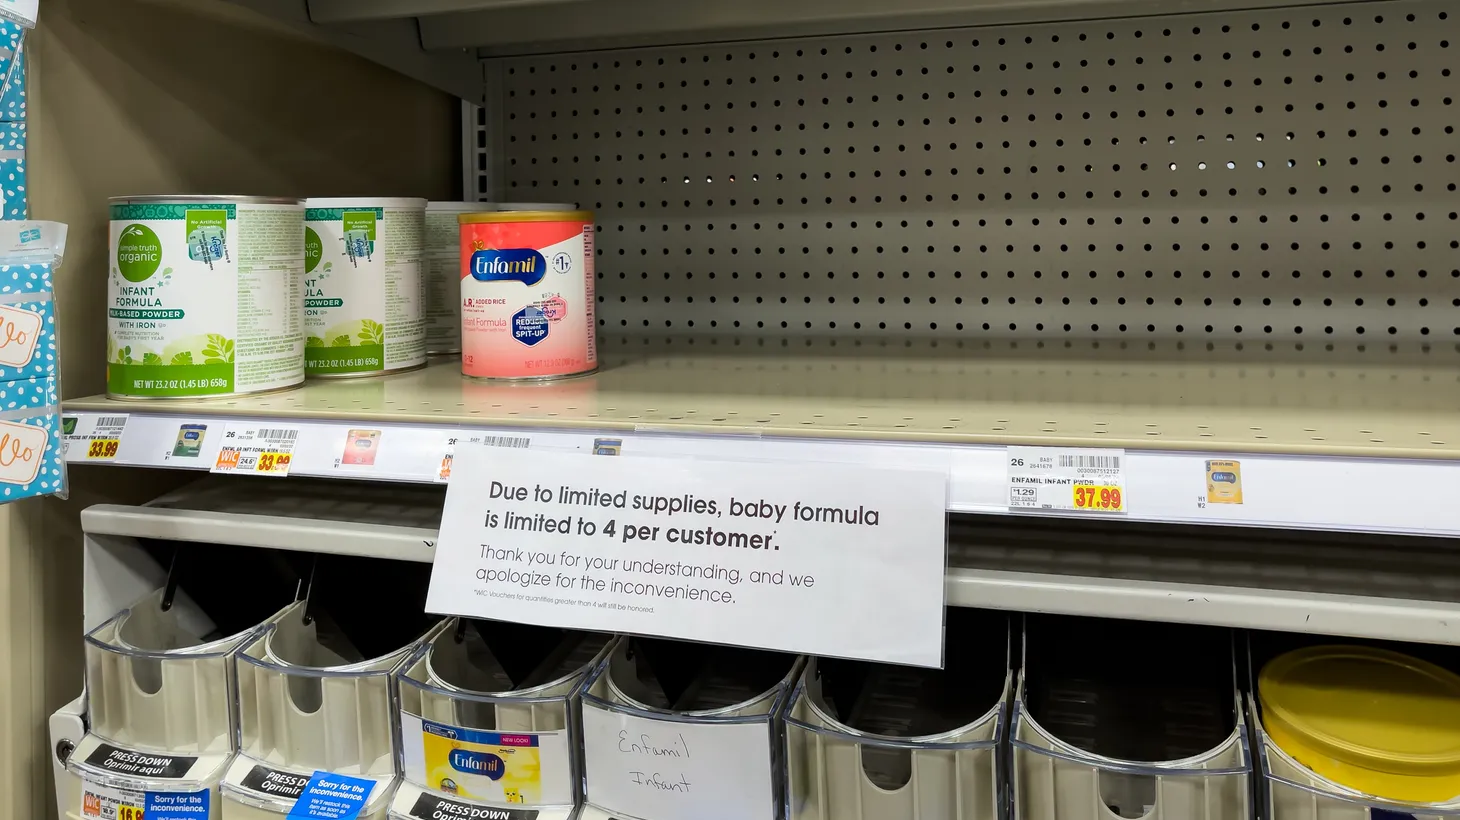 Supply chain issues and a recall from one of four major manufacturers last February both contributed to the ongoing shortage of baby formula.